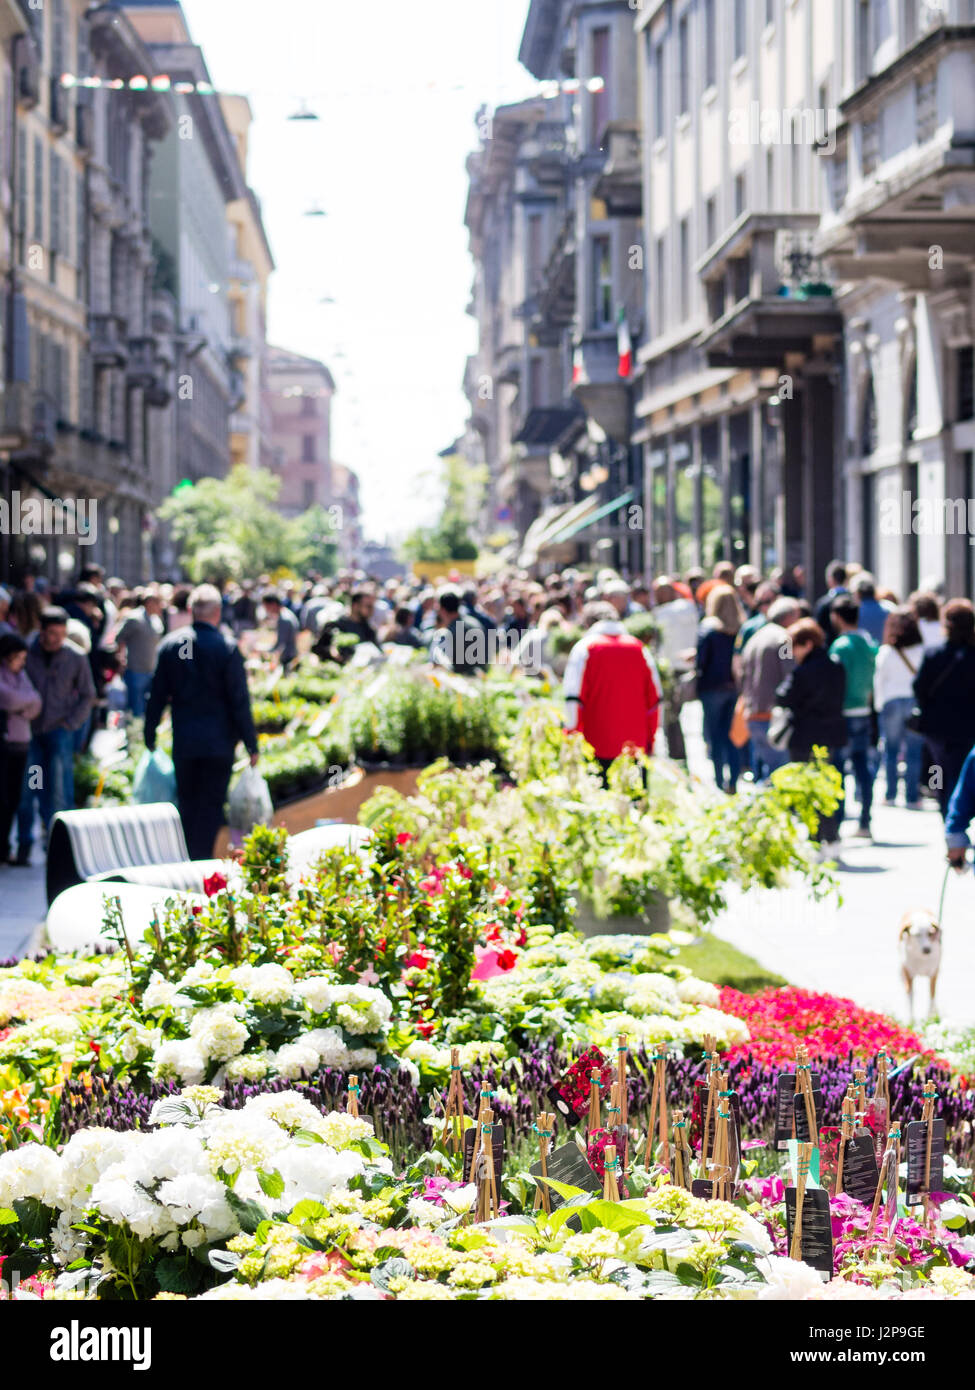 Crowded Botanic Invasions event - street flower and plants open market - Cremona, Italy Spring 30th April 2017 Stock Photo